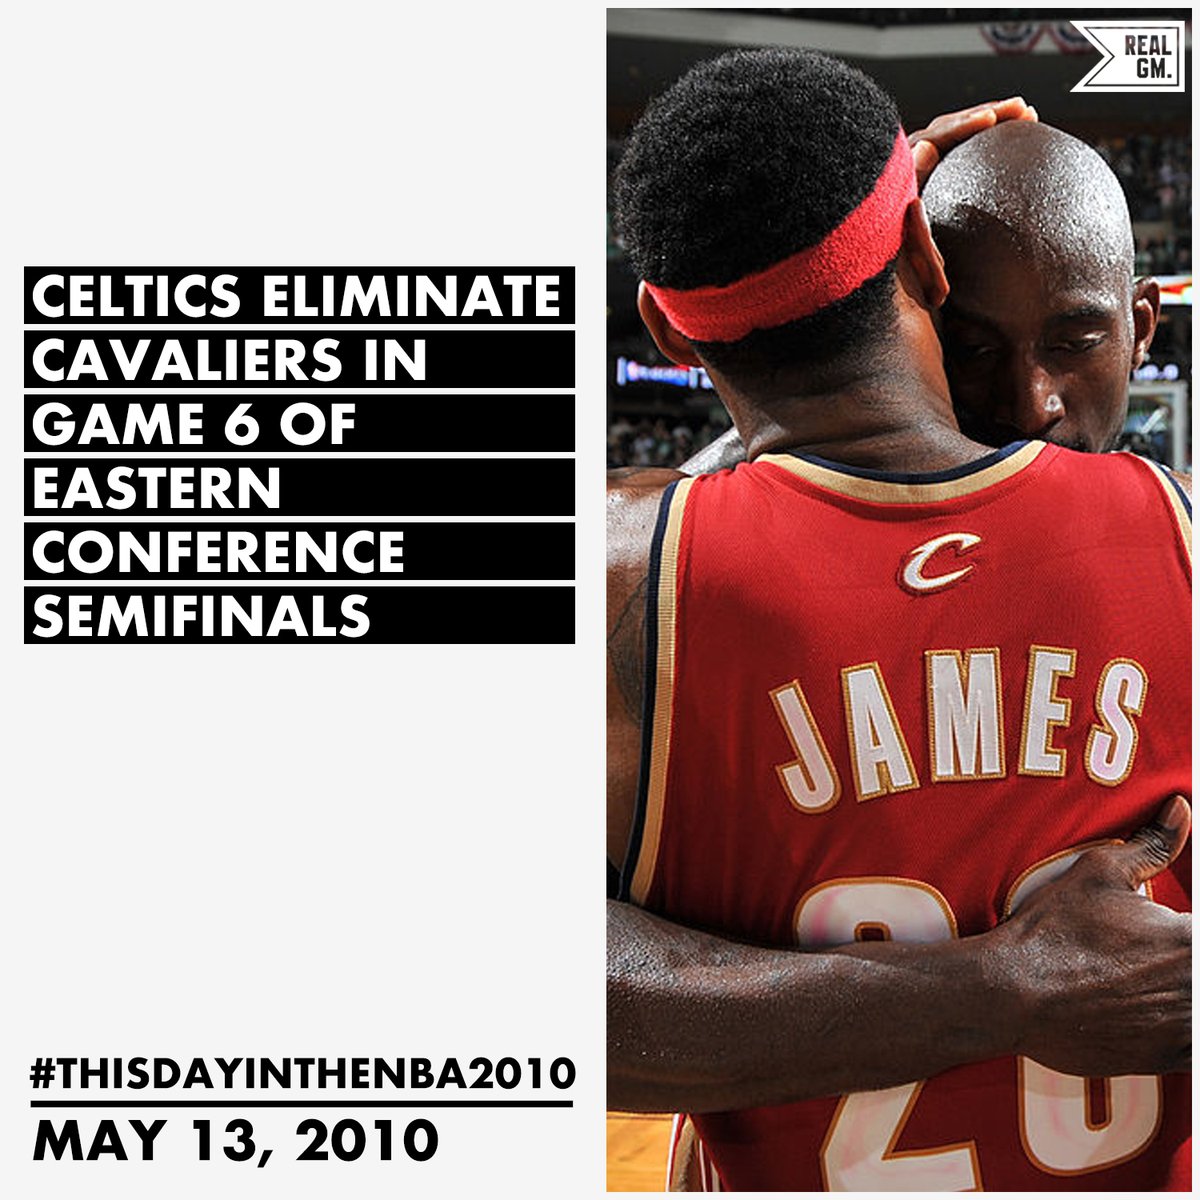  #ThisDayInTheNBA2010May 13, 2010Celtics Eliminate Cavaliers In Game 6 Of Eastern Conference Semifinals https://basketball.realgm.com/wiretap/203883/Celtics-Eliminate-Cavaliers-In-Game-6-Of-Eastern-Conference-Semifinals